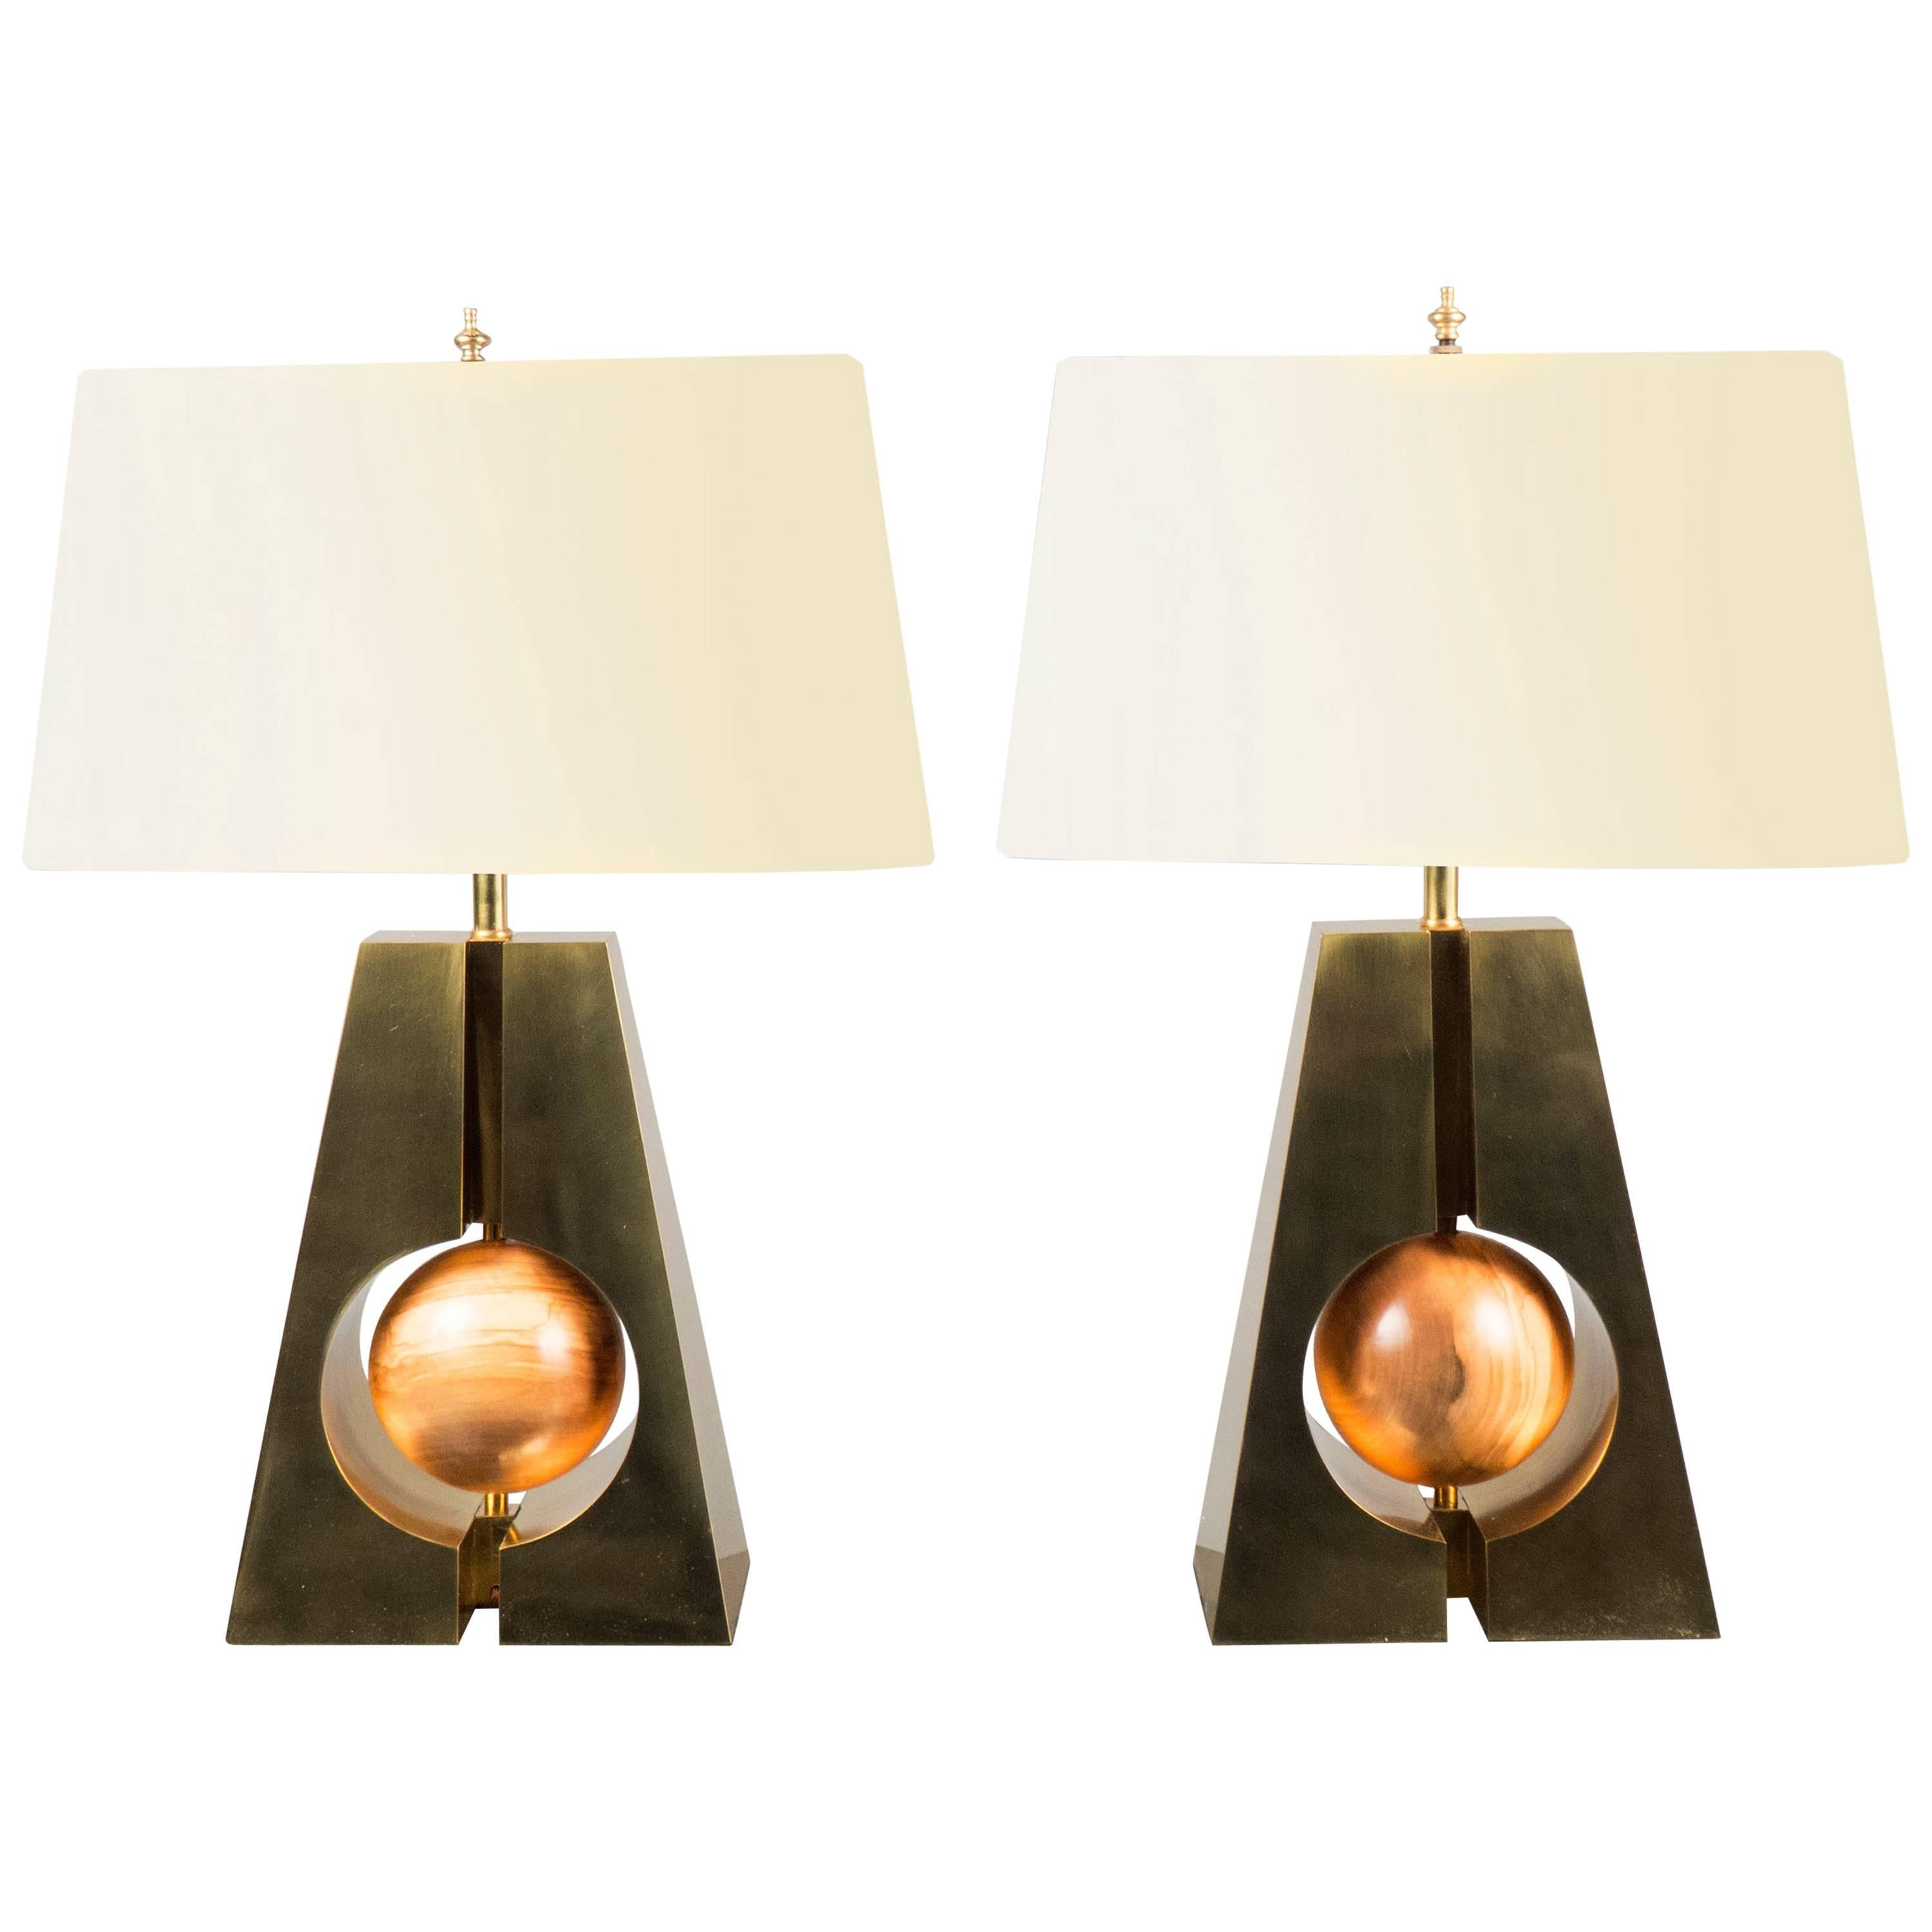 Pair of Brass and Wood Lamps, Italy, 2017